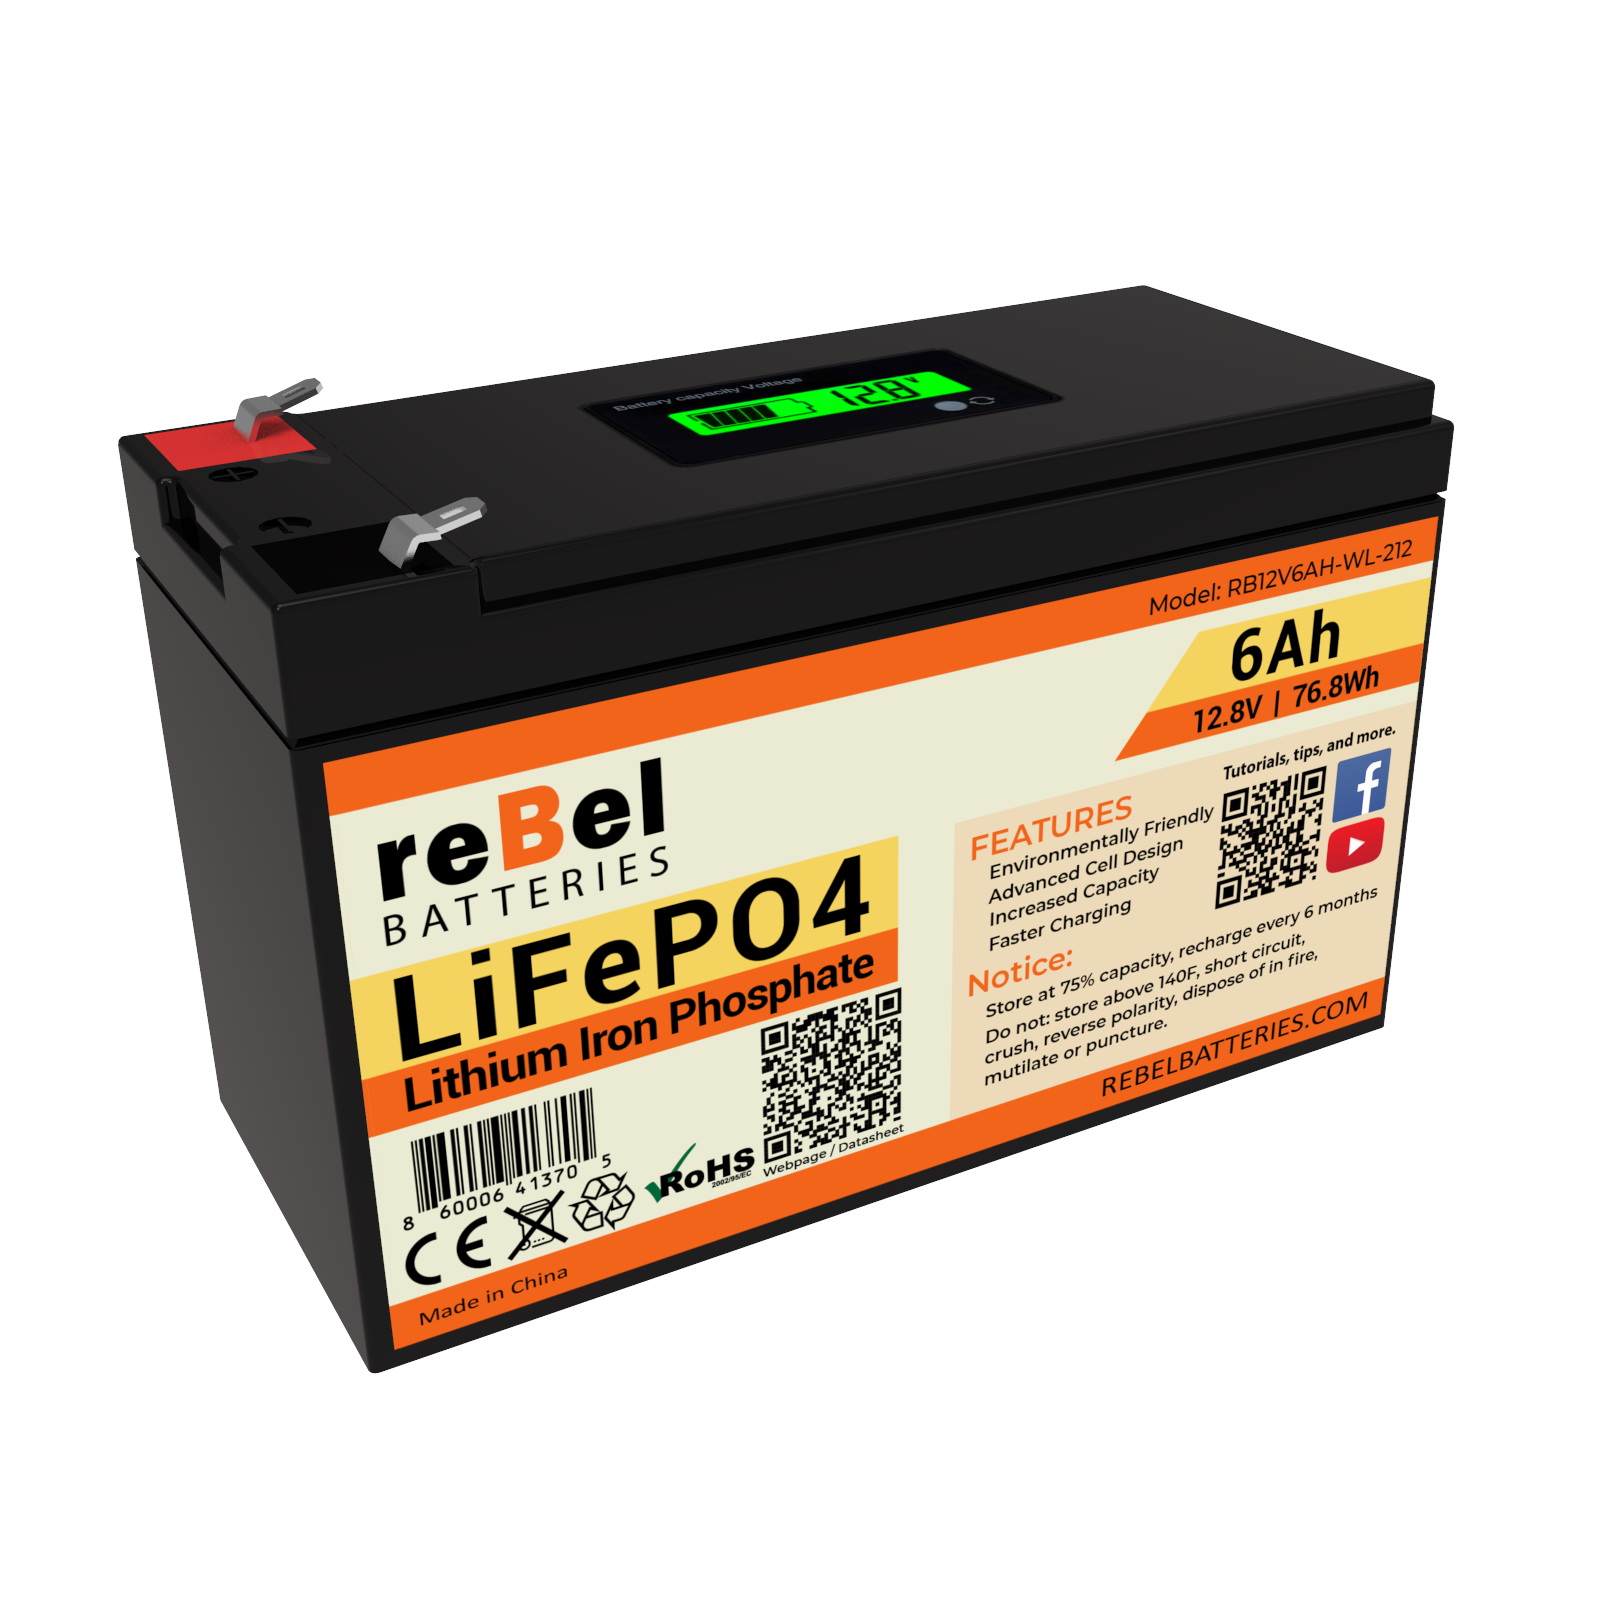 Can the 6AH and 12AH reBel batteries be used with a power inverter?